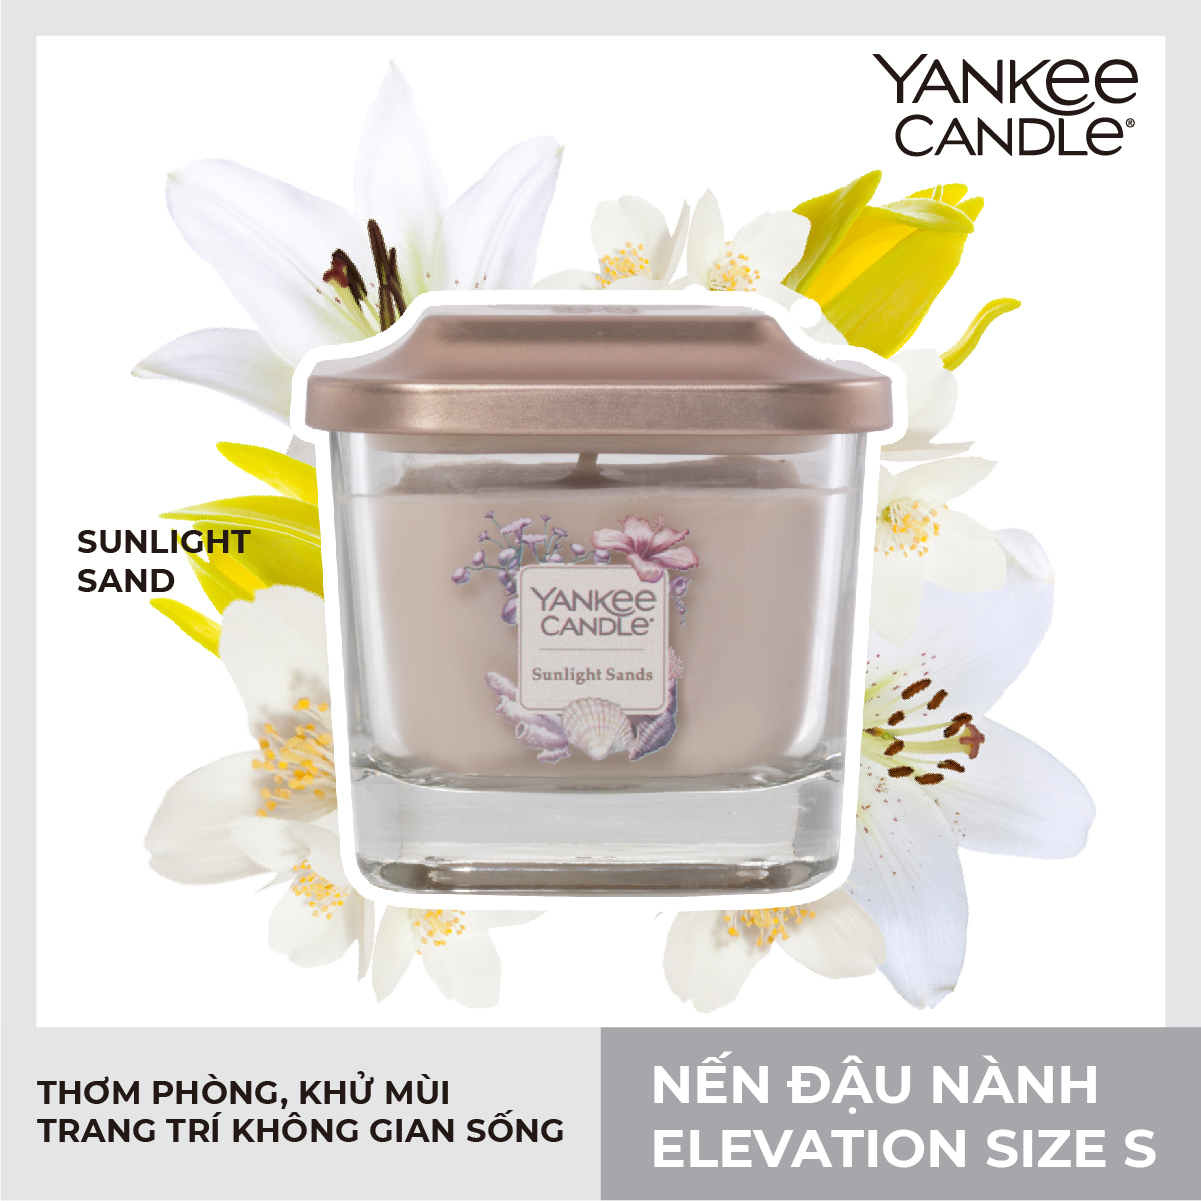 Nến ly vuông Elevation Yankee Candle